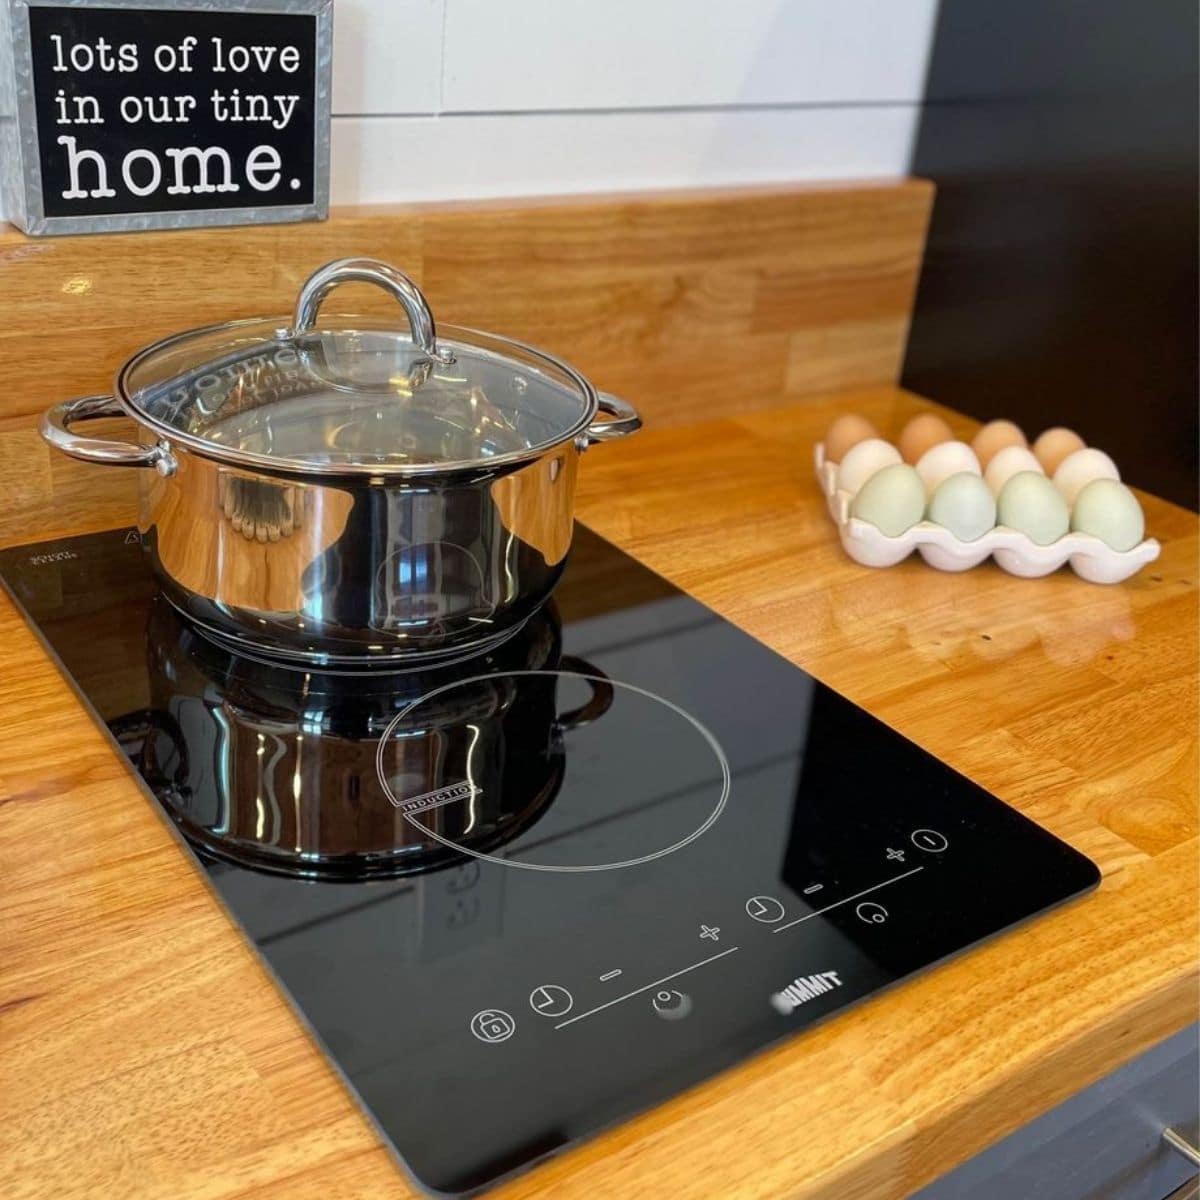 induction cooktop in butcherblock counter with pot on back burner